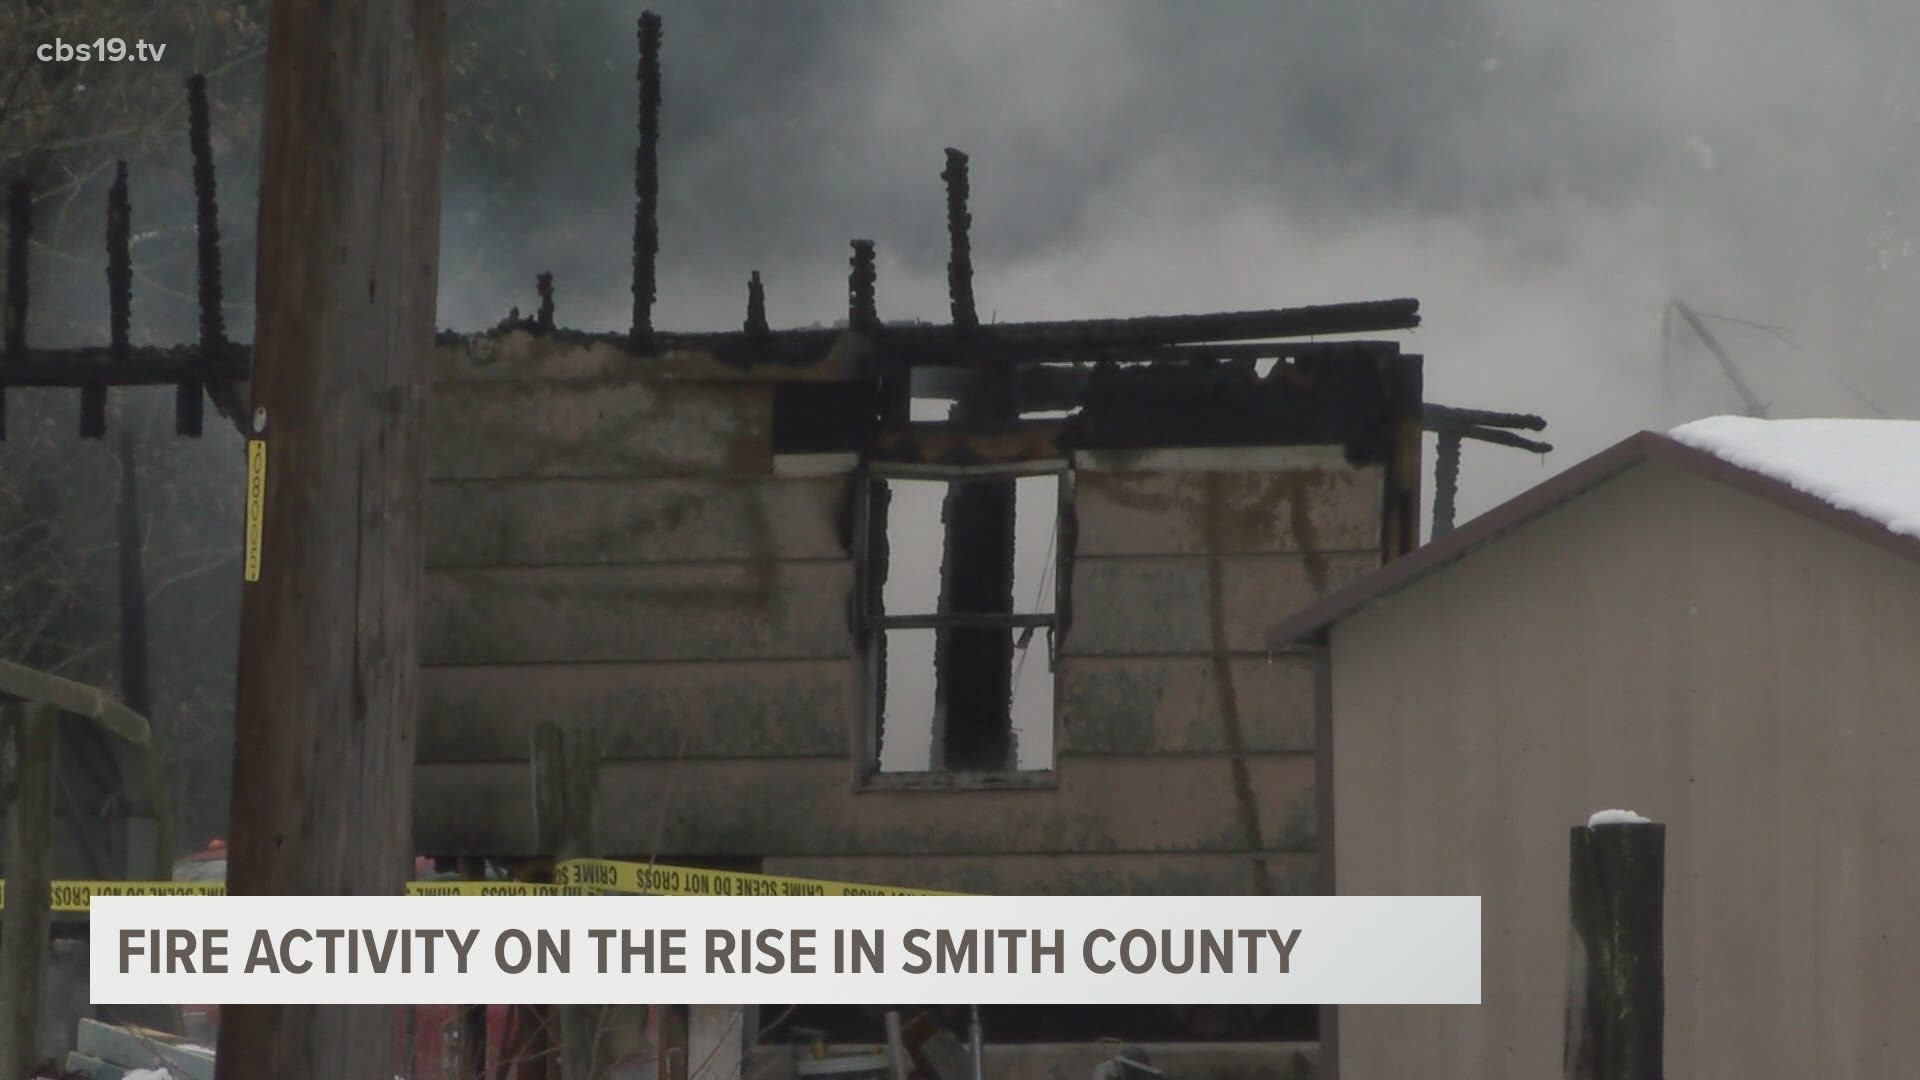 Since January, the Smith County Fire Marshal's Office has received 164 calls for service.